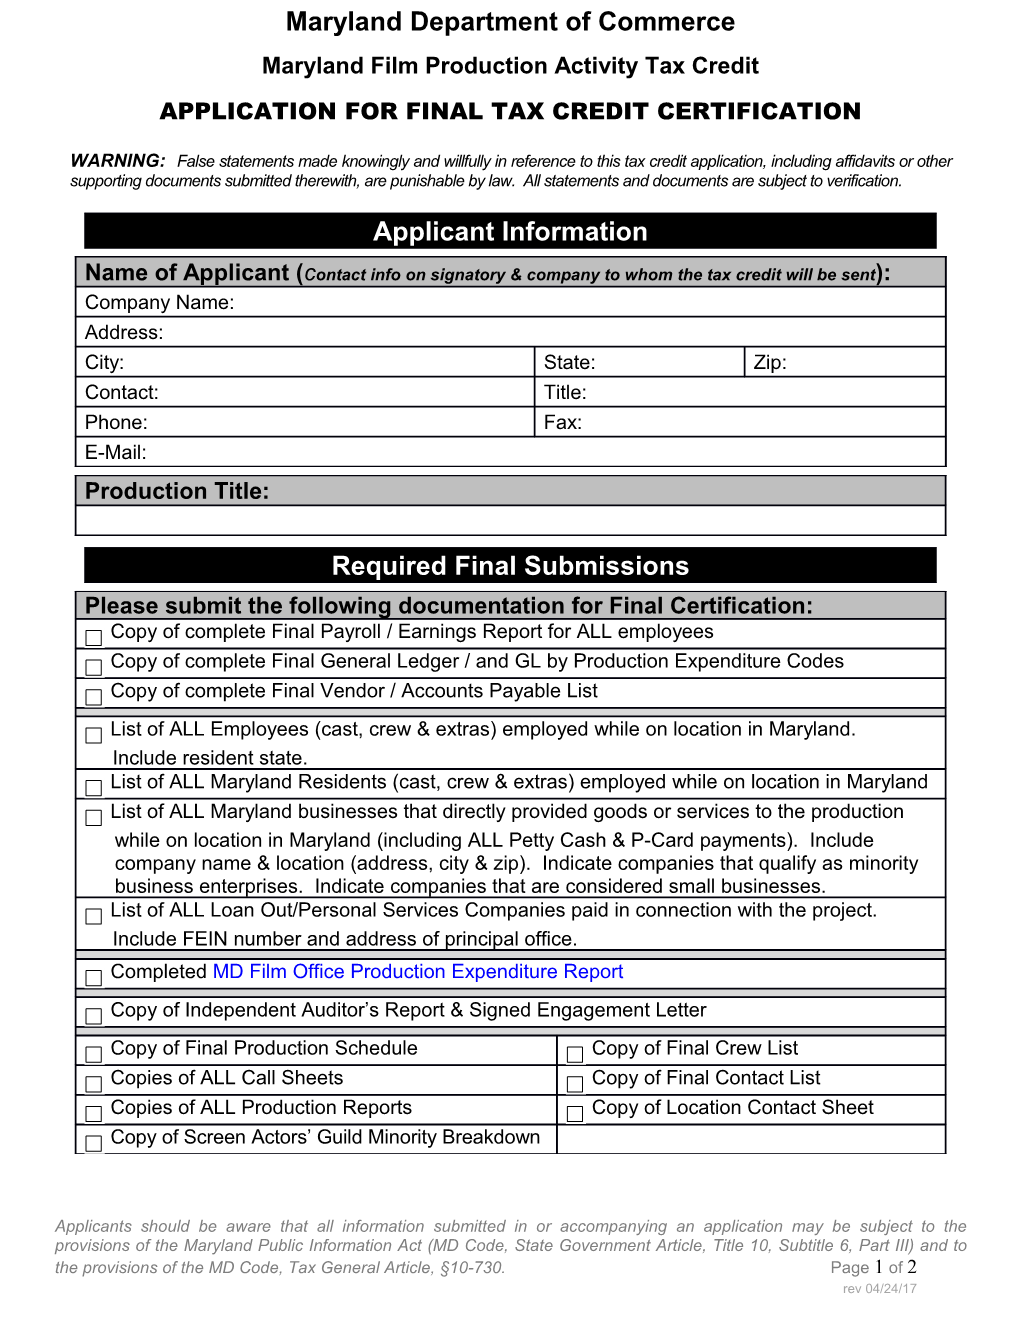 APPLICATION for FINAL TAX CREDIT CERTIFICATION Page 1